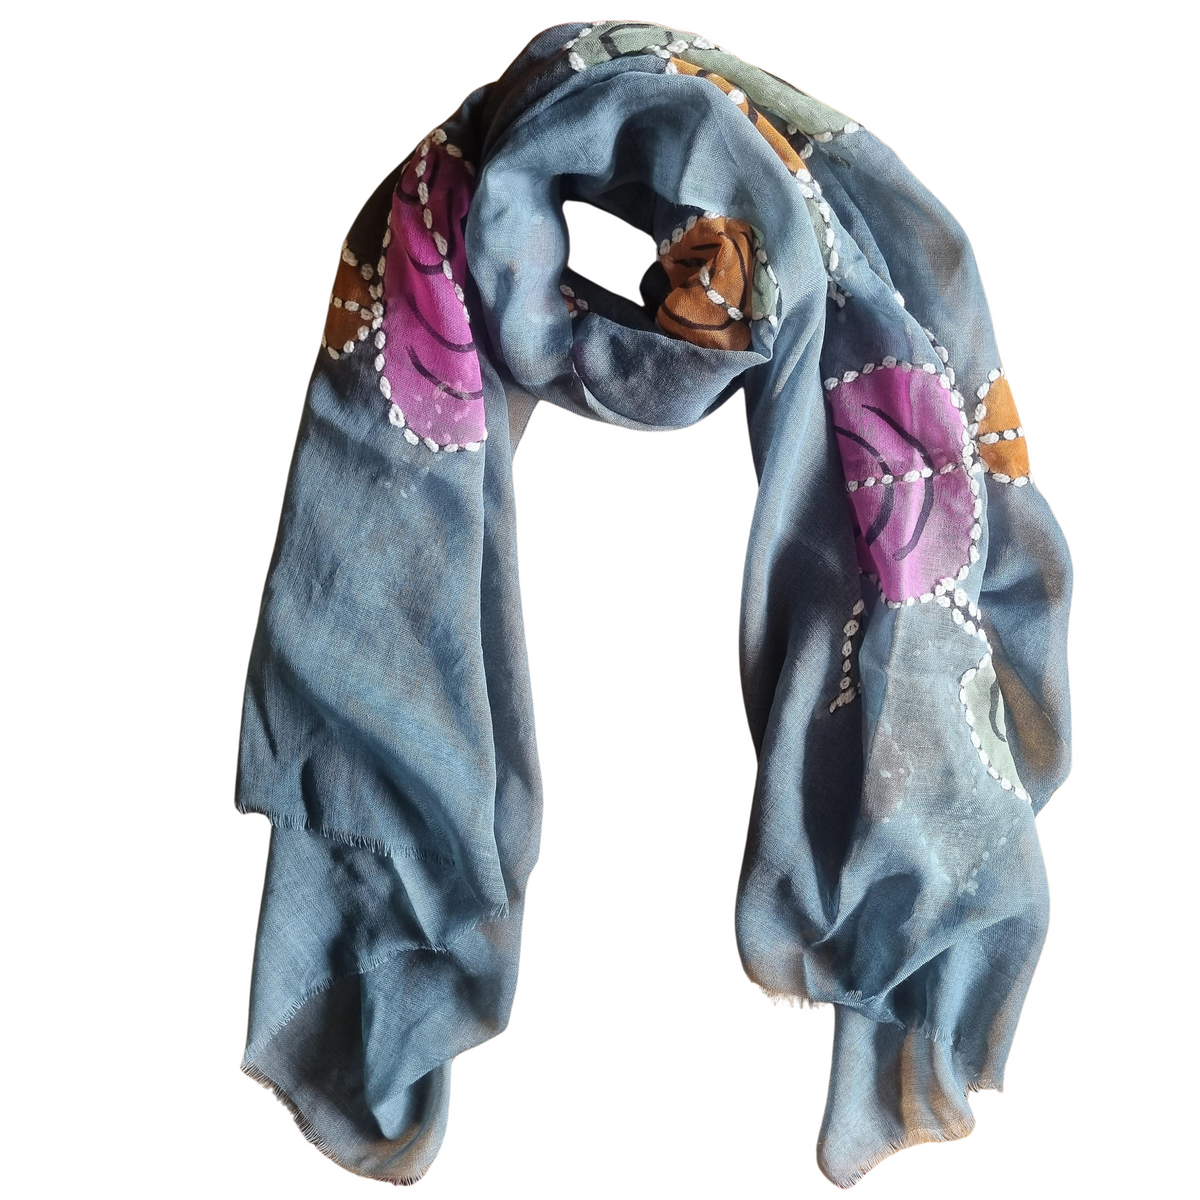 Zoda - Embroidered Wool Scarf - Teal